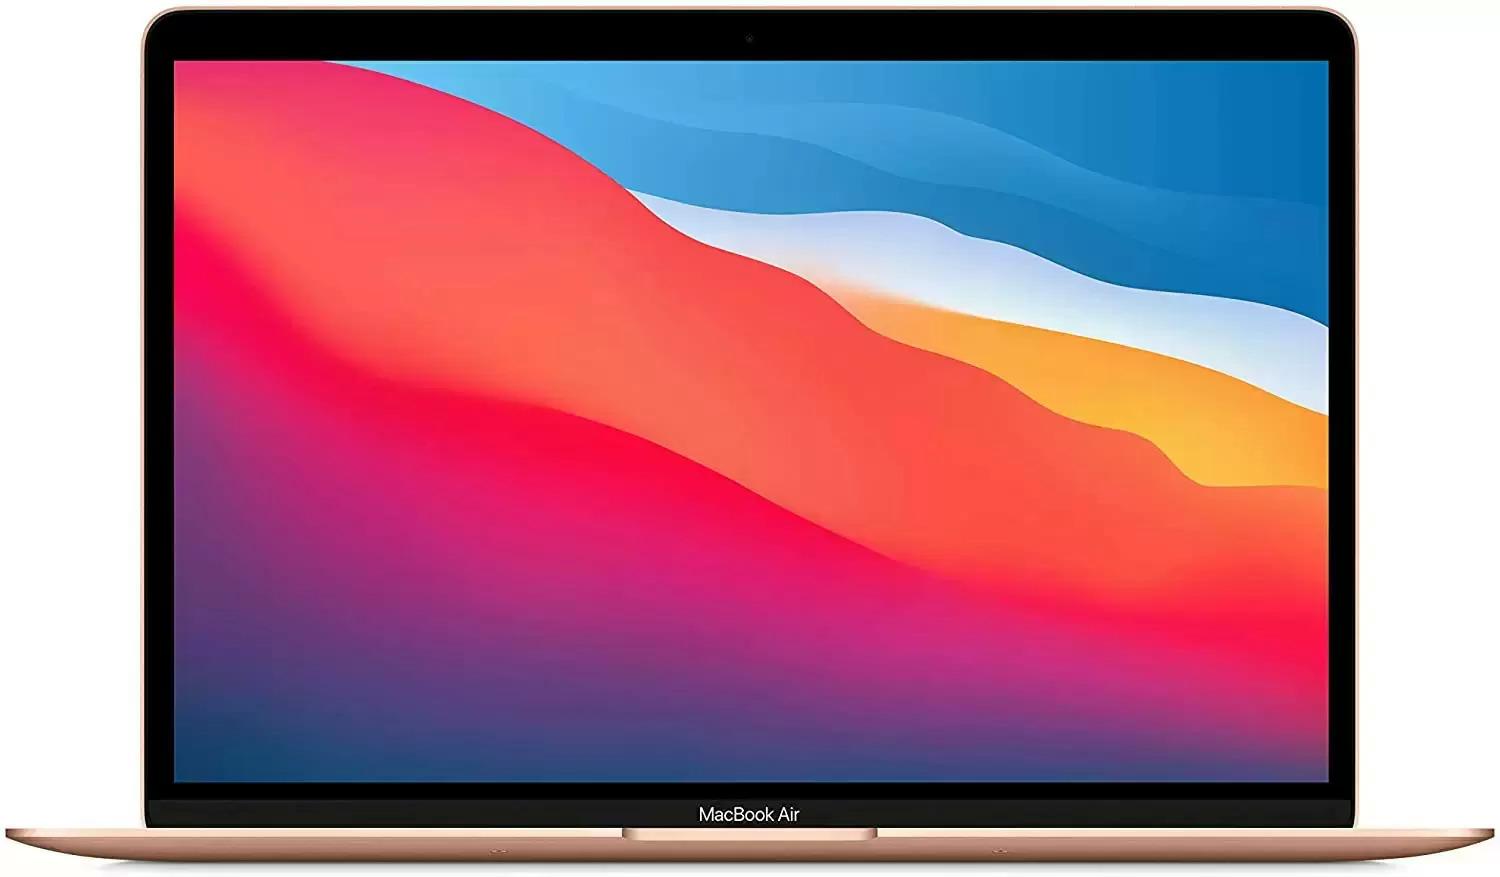 Apple MacBook Air M1 8GB Notebook Laptop for $799 Shipped